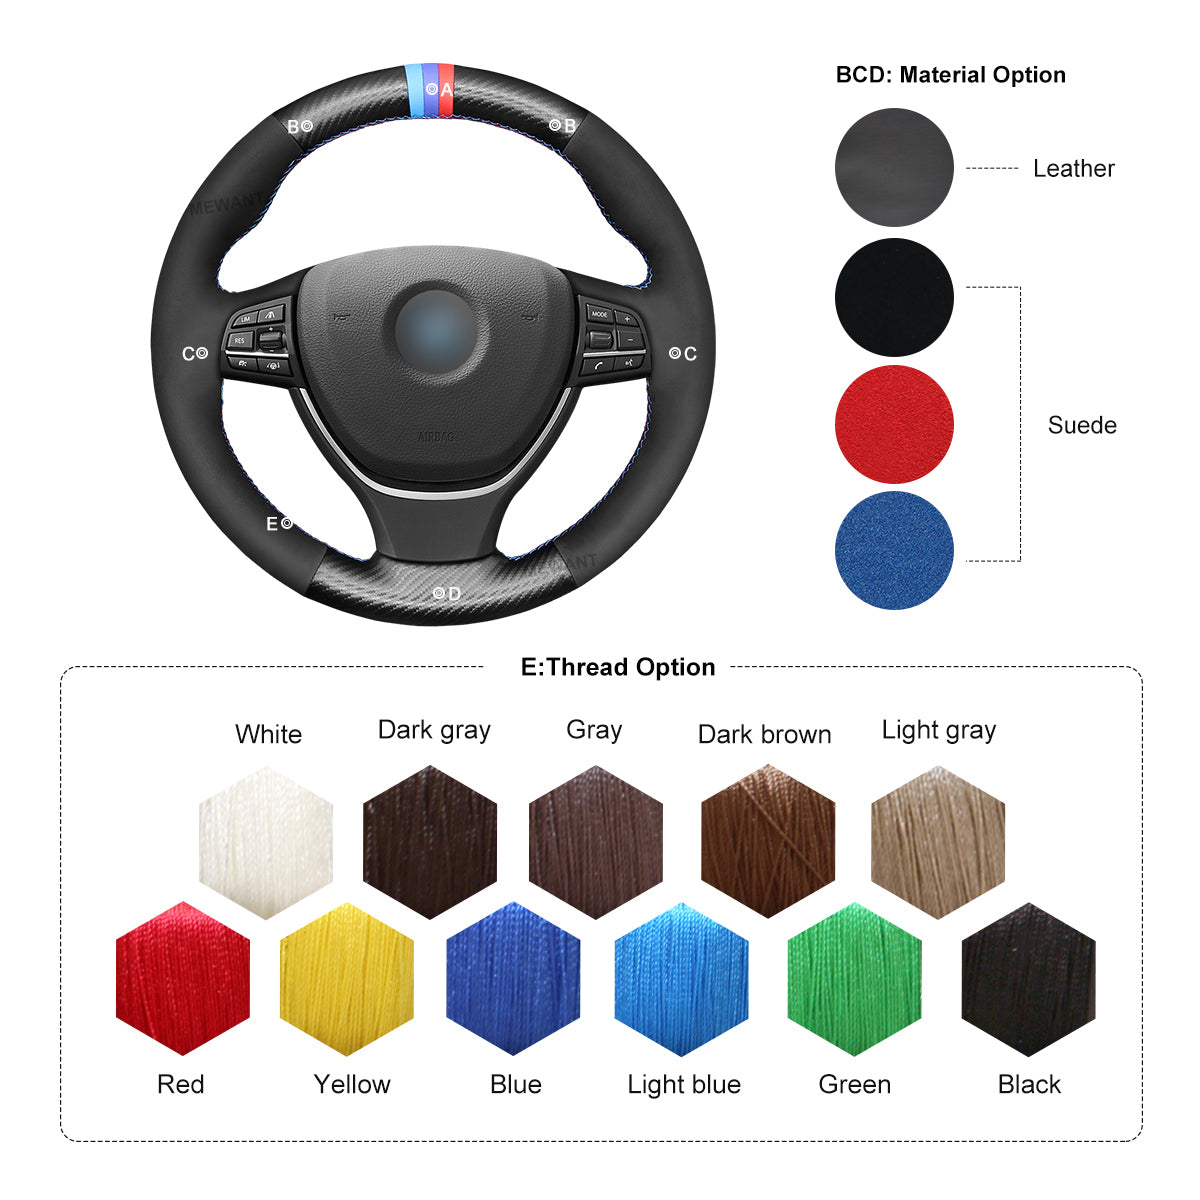 MEWANT Leather Suede Carbon Fiber Car Steering Wheel Cover for BMW 5 Series F10 F11 (Touring) F07 (GT) 6 SeriesF12 F13 F06 7 Series F01 F02